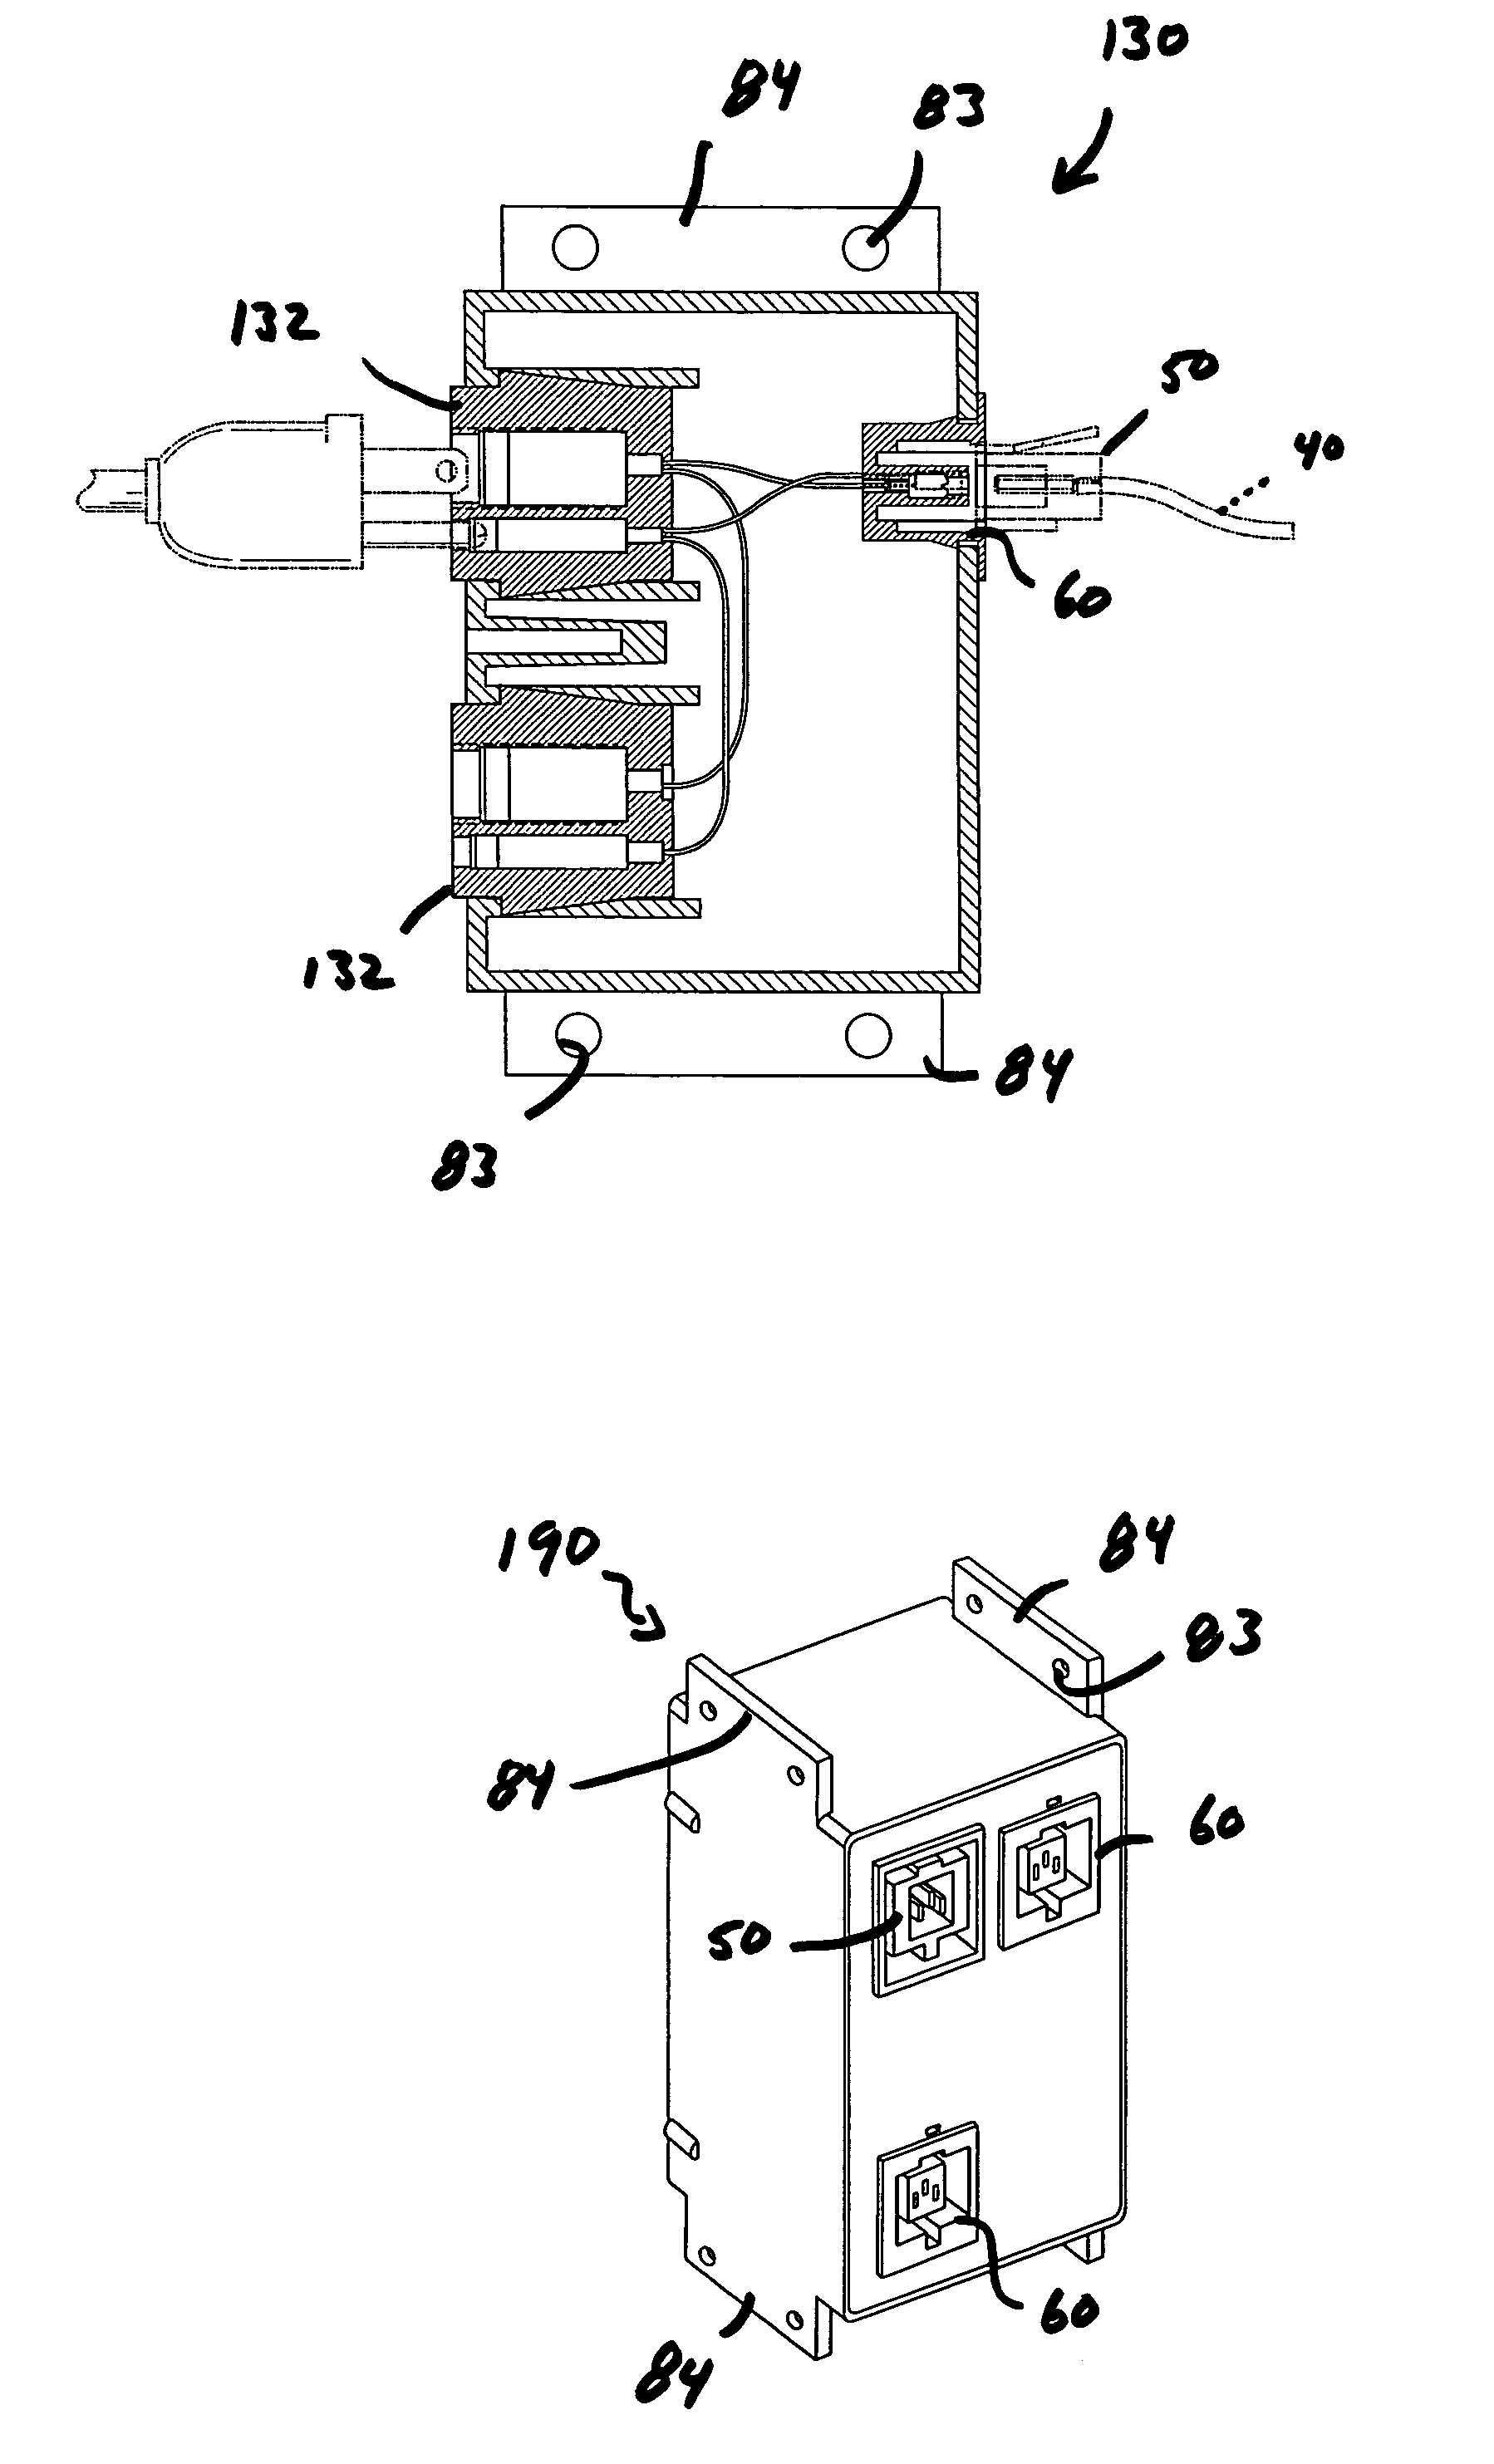 Module with interconnected male power input receptacle, female power output receptable and female load receptable